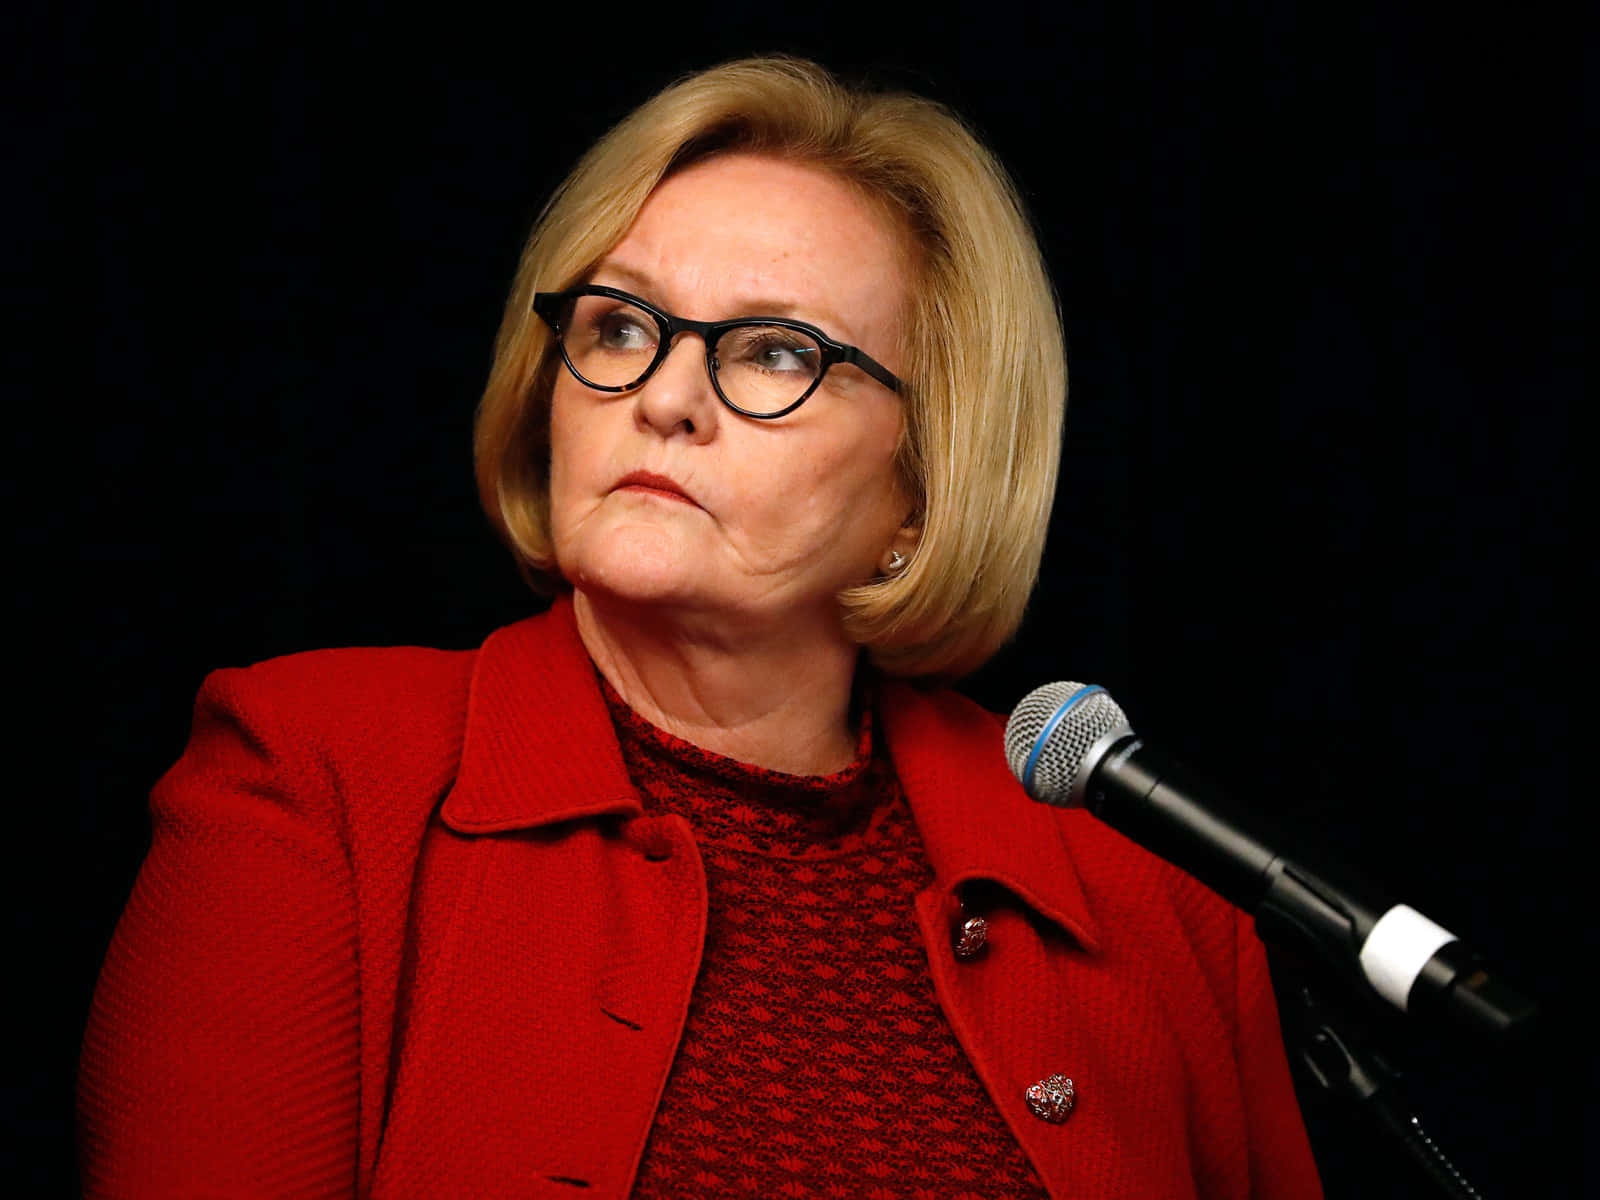 Claire Mccaskill In A Red Outfit Background